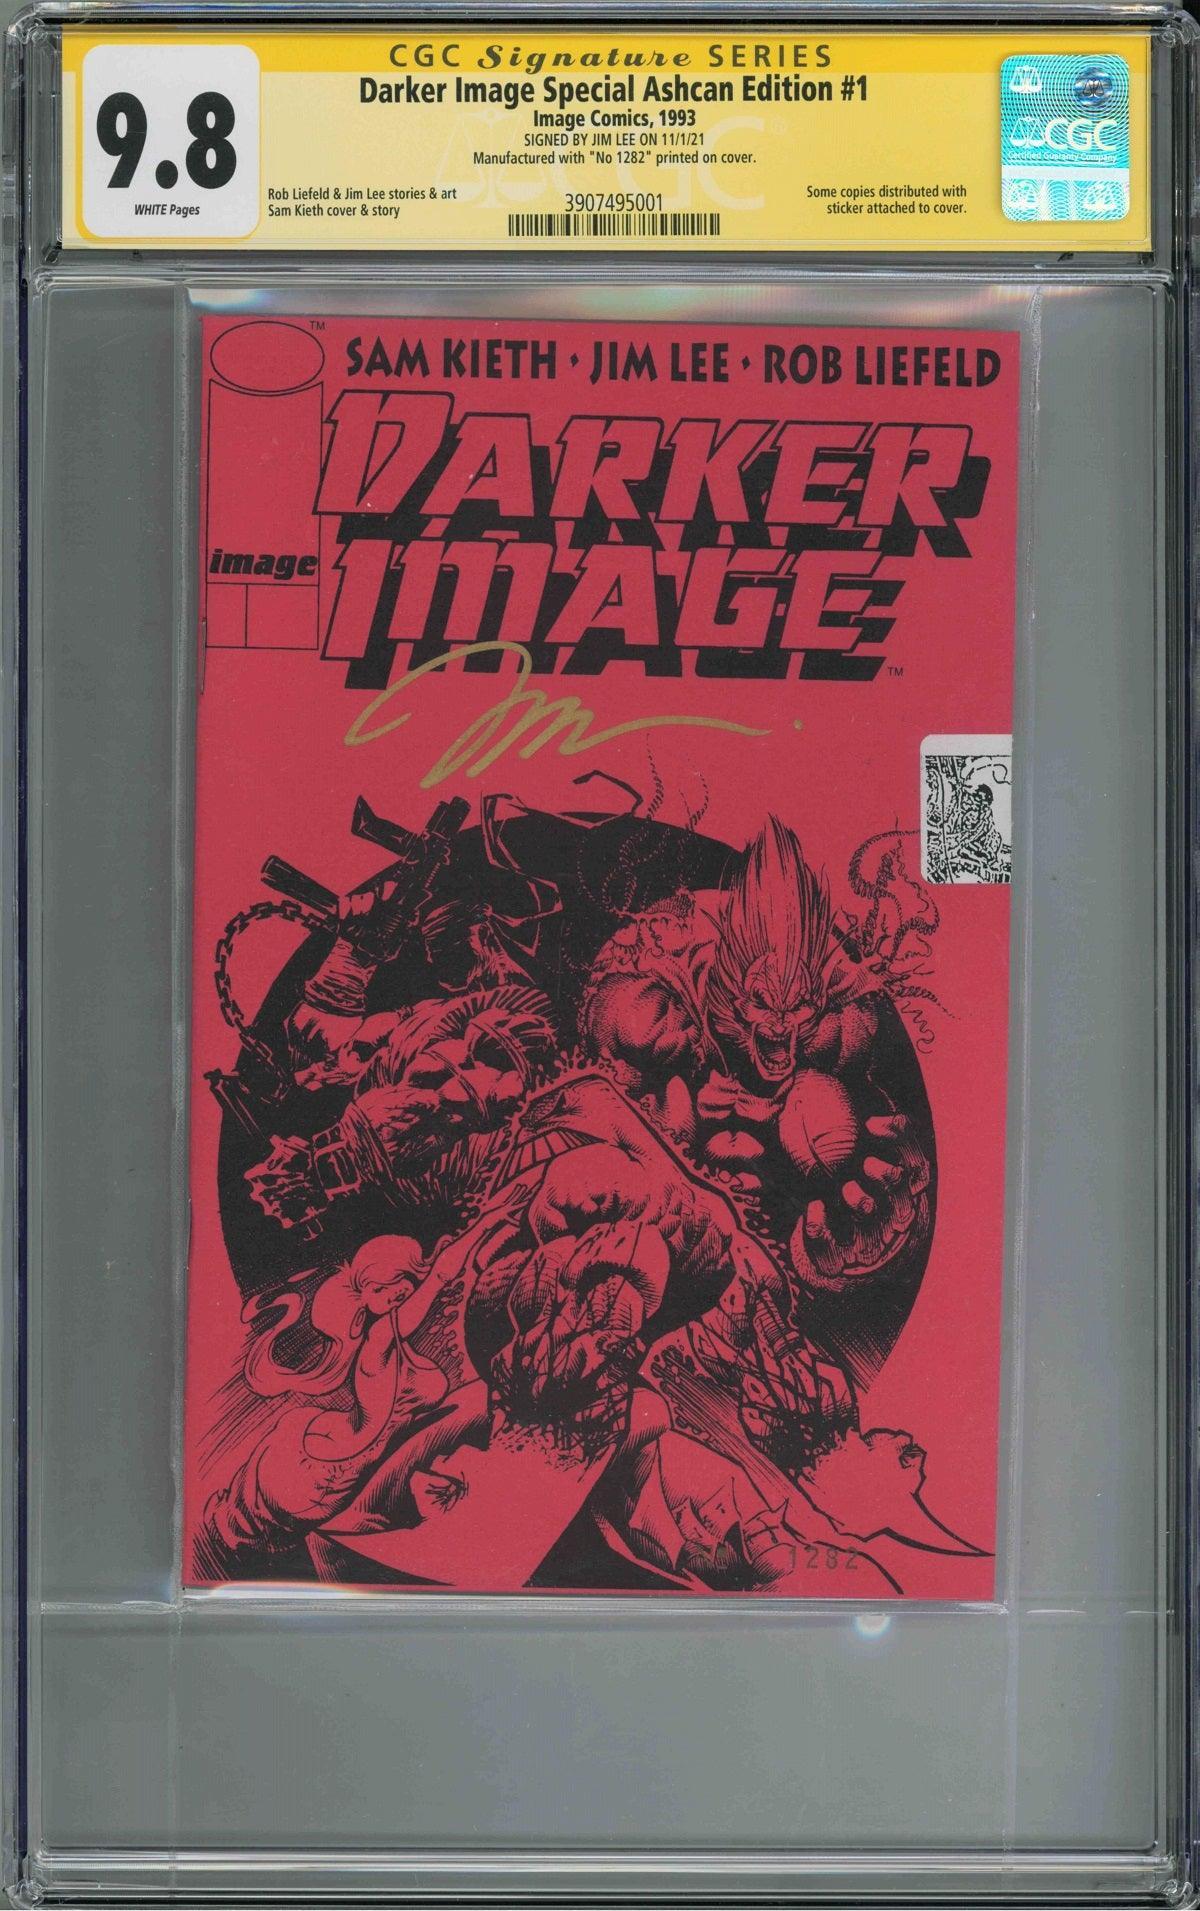 CGC DARKER IMAGE SPECIAL ASHCAN EDITION #1 1993 RARE STICKER VERSION (9.8) SIGNATURE SERIES - SIGNED BY JIM LEE - Kings Comics